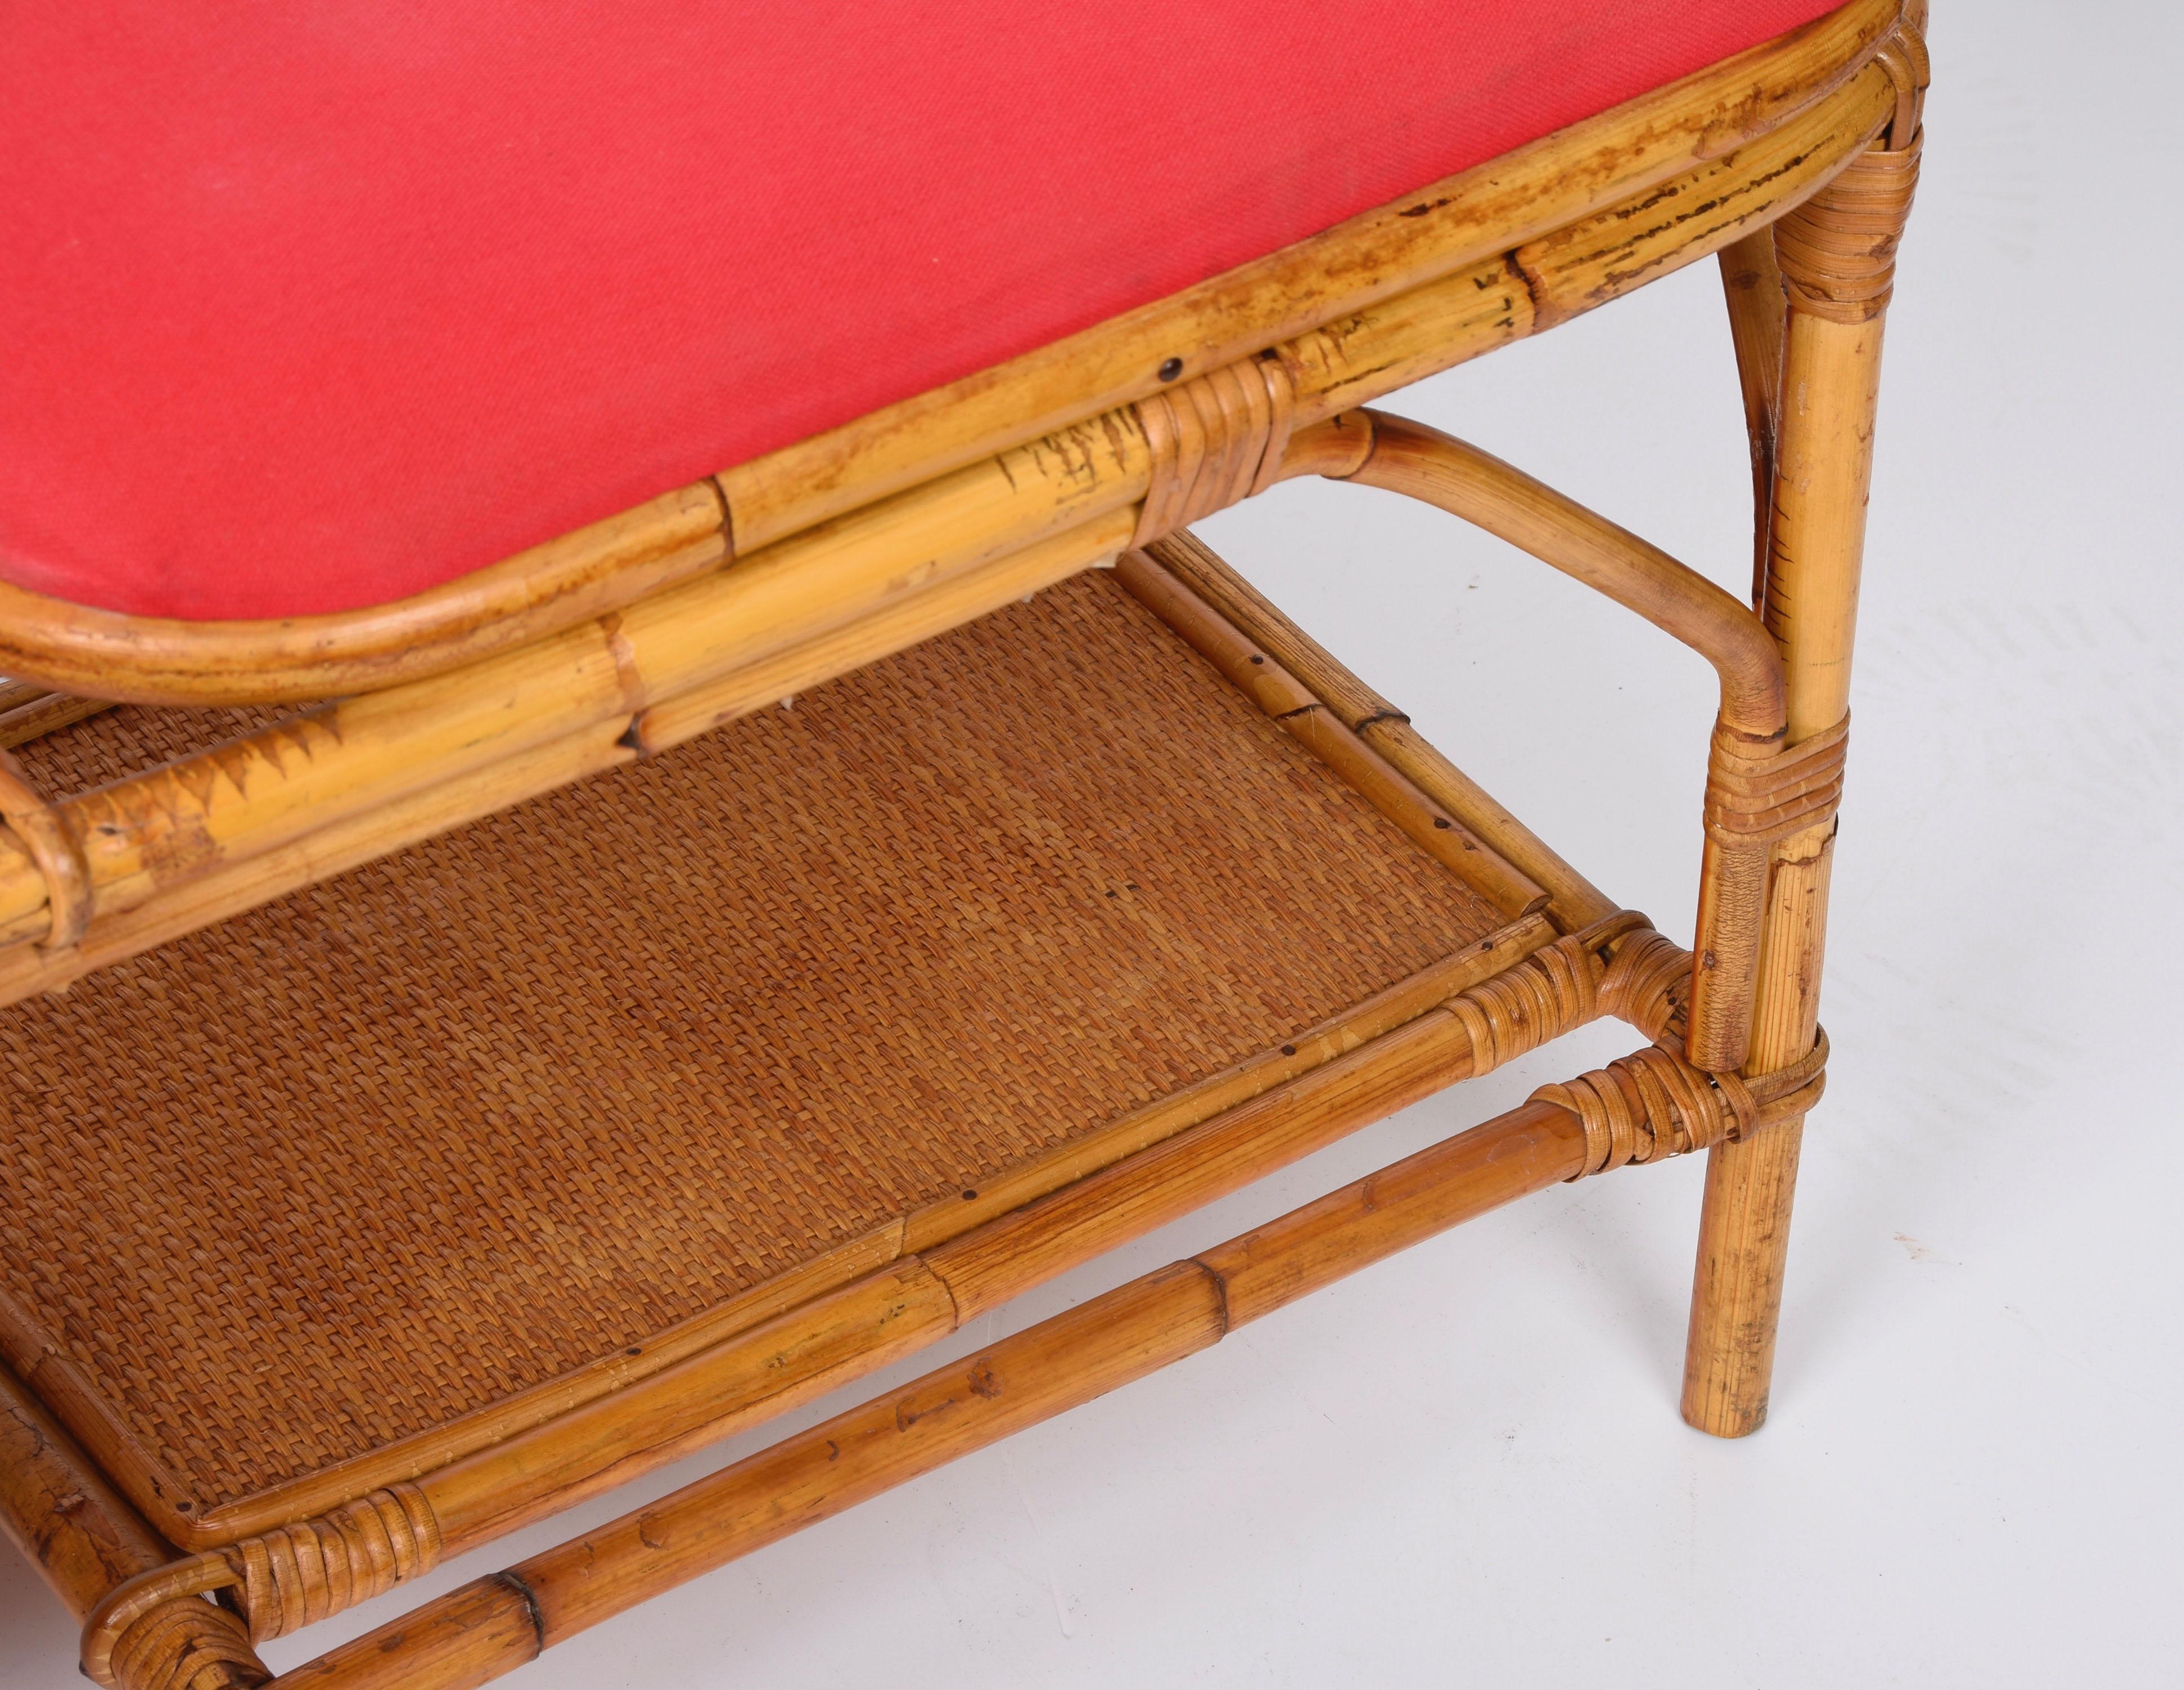 Midcentury Bamboo and Rattan Italian Bench with Box Case, 1950s For Sale 7